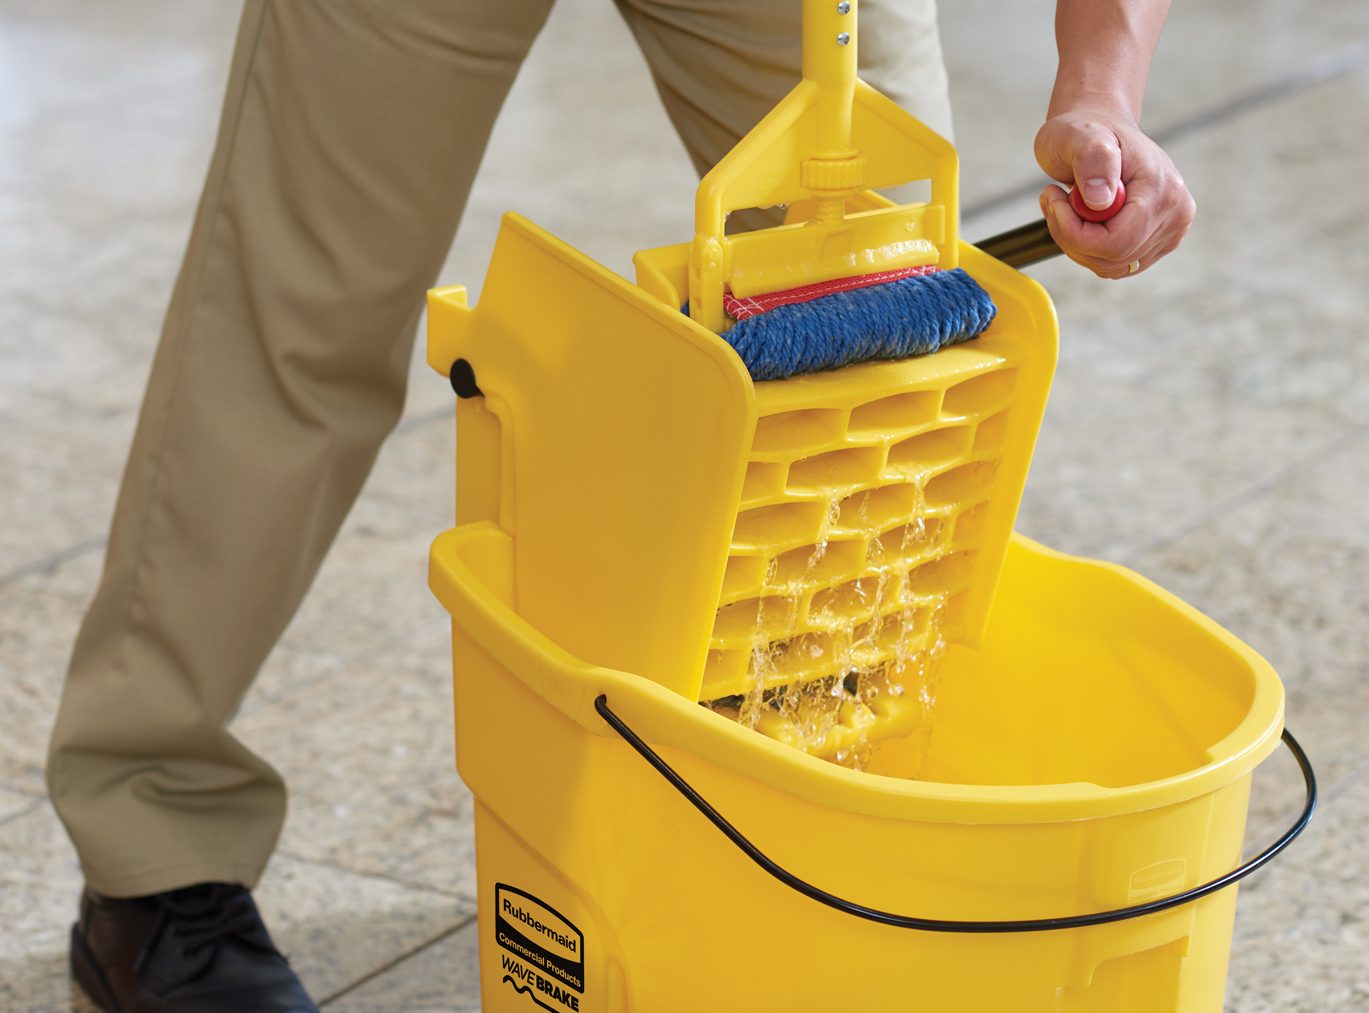 Rubbermaid Commercial Products Launches New Floor Mops Bucket